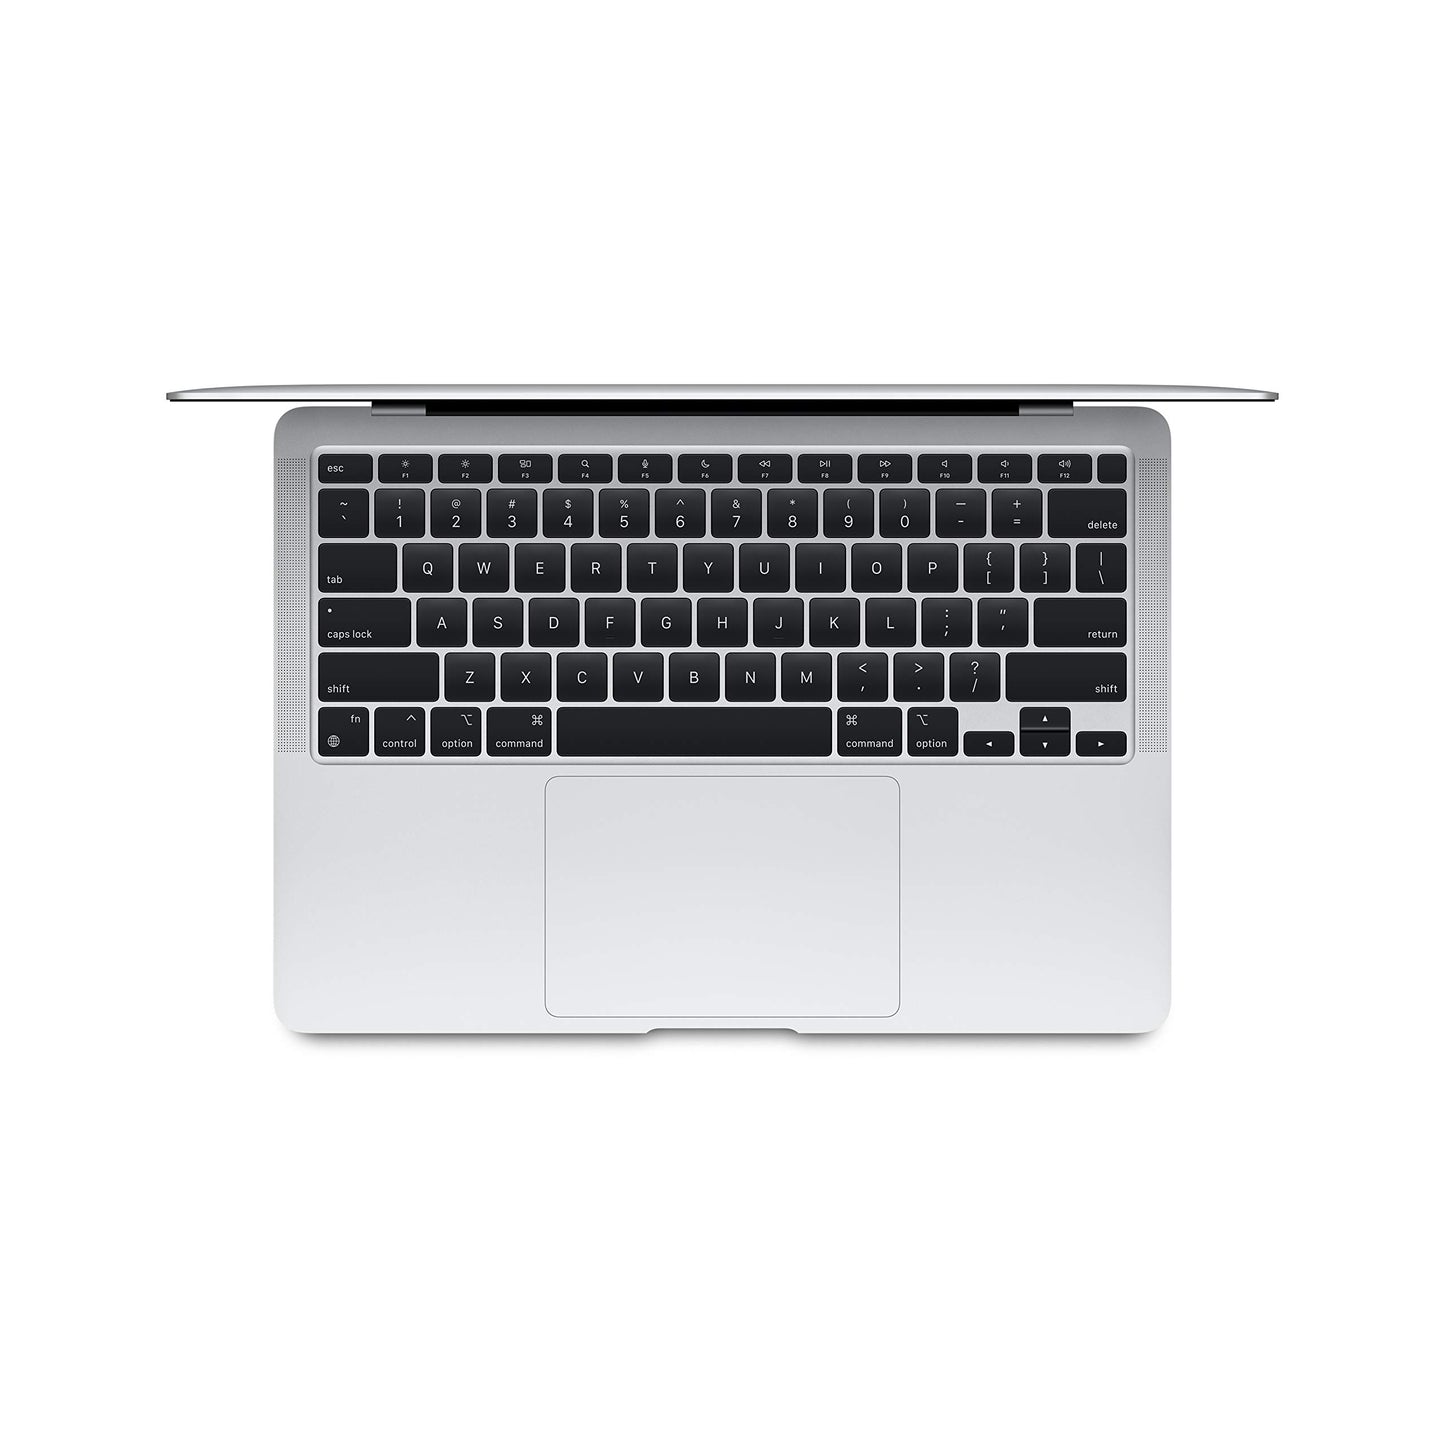 Apple 2020 MacBook Air Laptop M1 Chip, 13” Retina Display, 8GB RAM, 256GB SSD Storage, Backlit Keyboard, FaceTime HD Camera, Touch ID. Works with iPhone/iPad; Silver